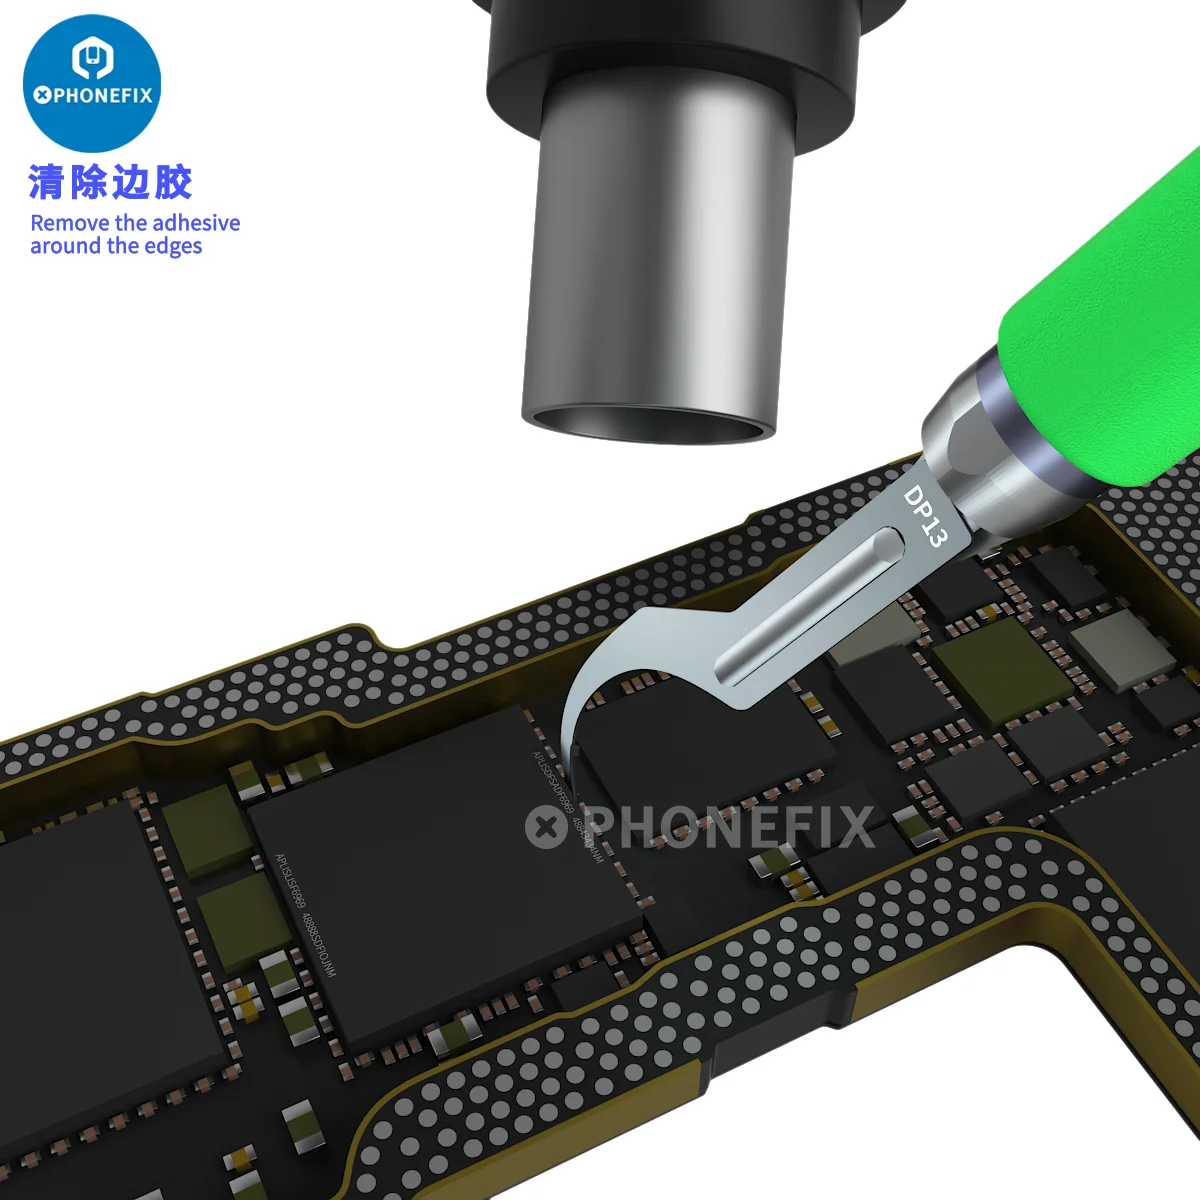 Mijing KC8 Flexible Quick Release Knife for Cutting Black Glue Side Glue Removal Motherboard Glue Cleaning Hard Disk Prying Tool images - 6